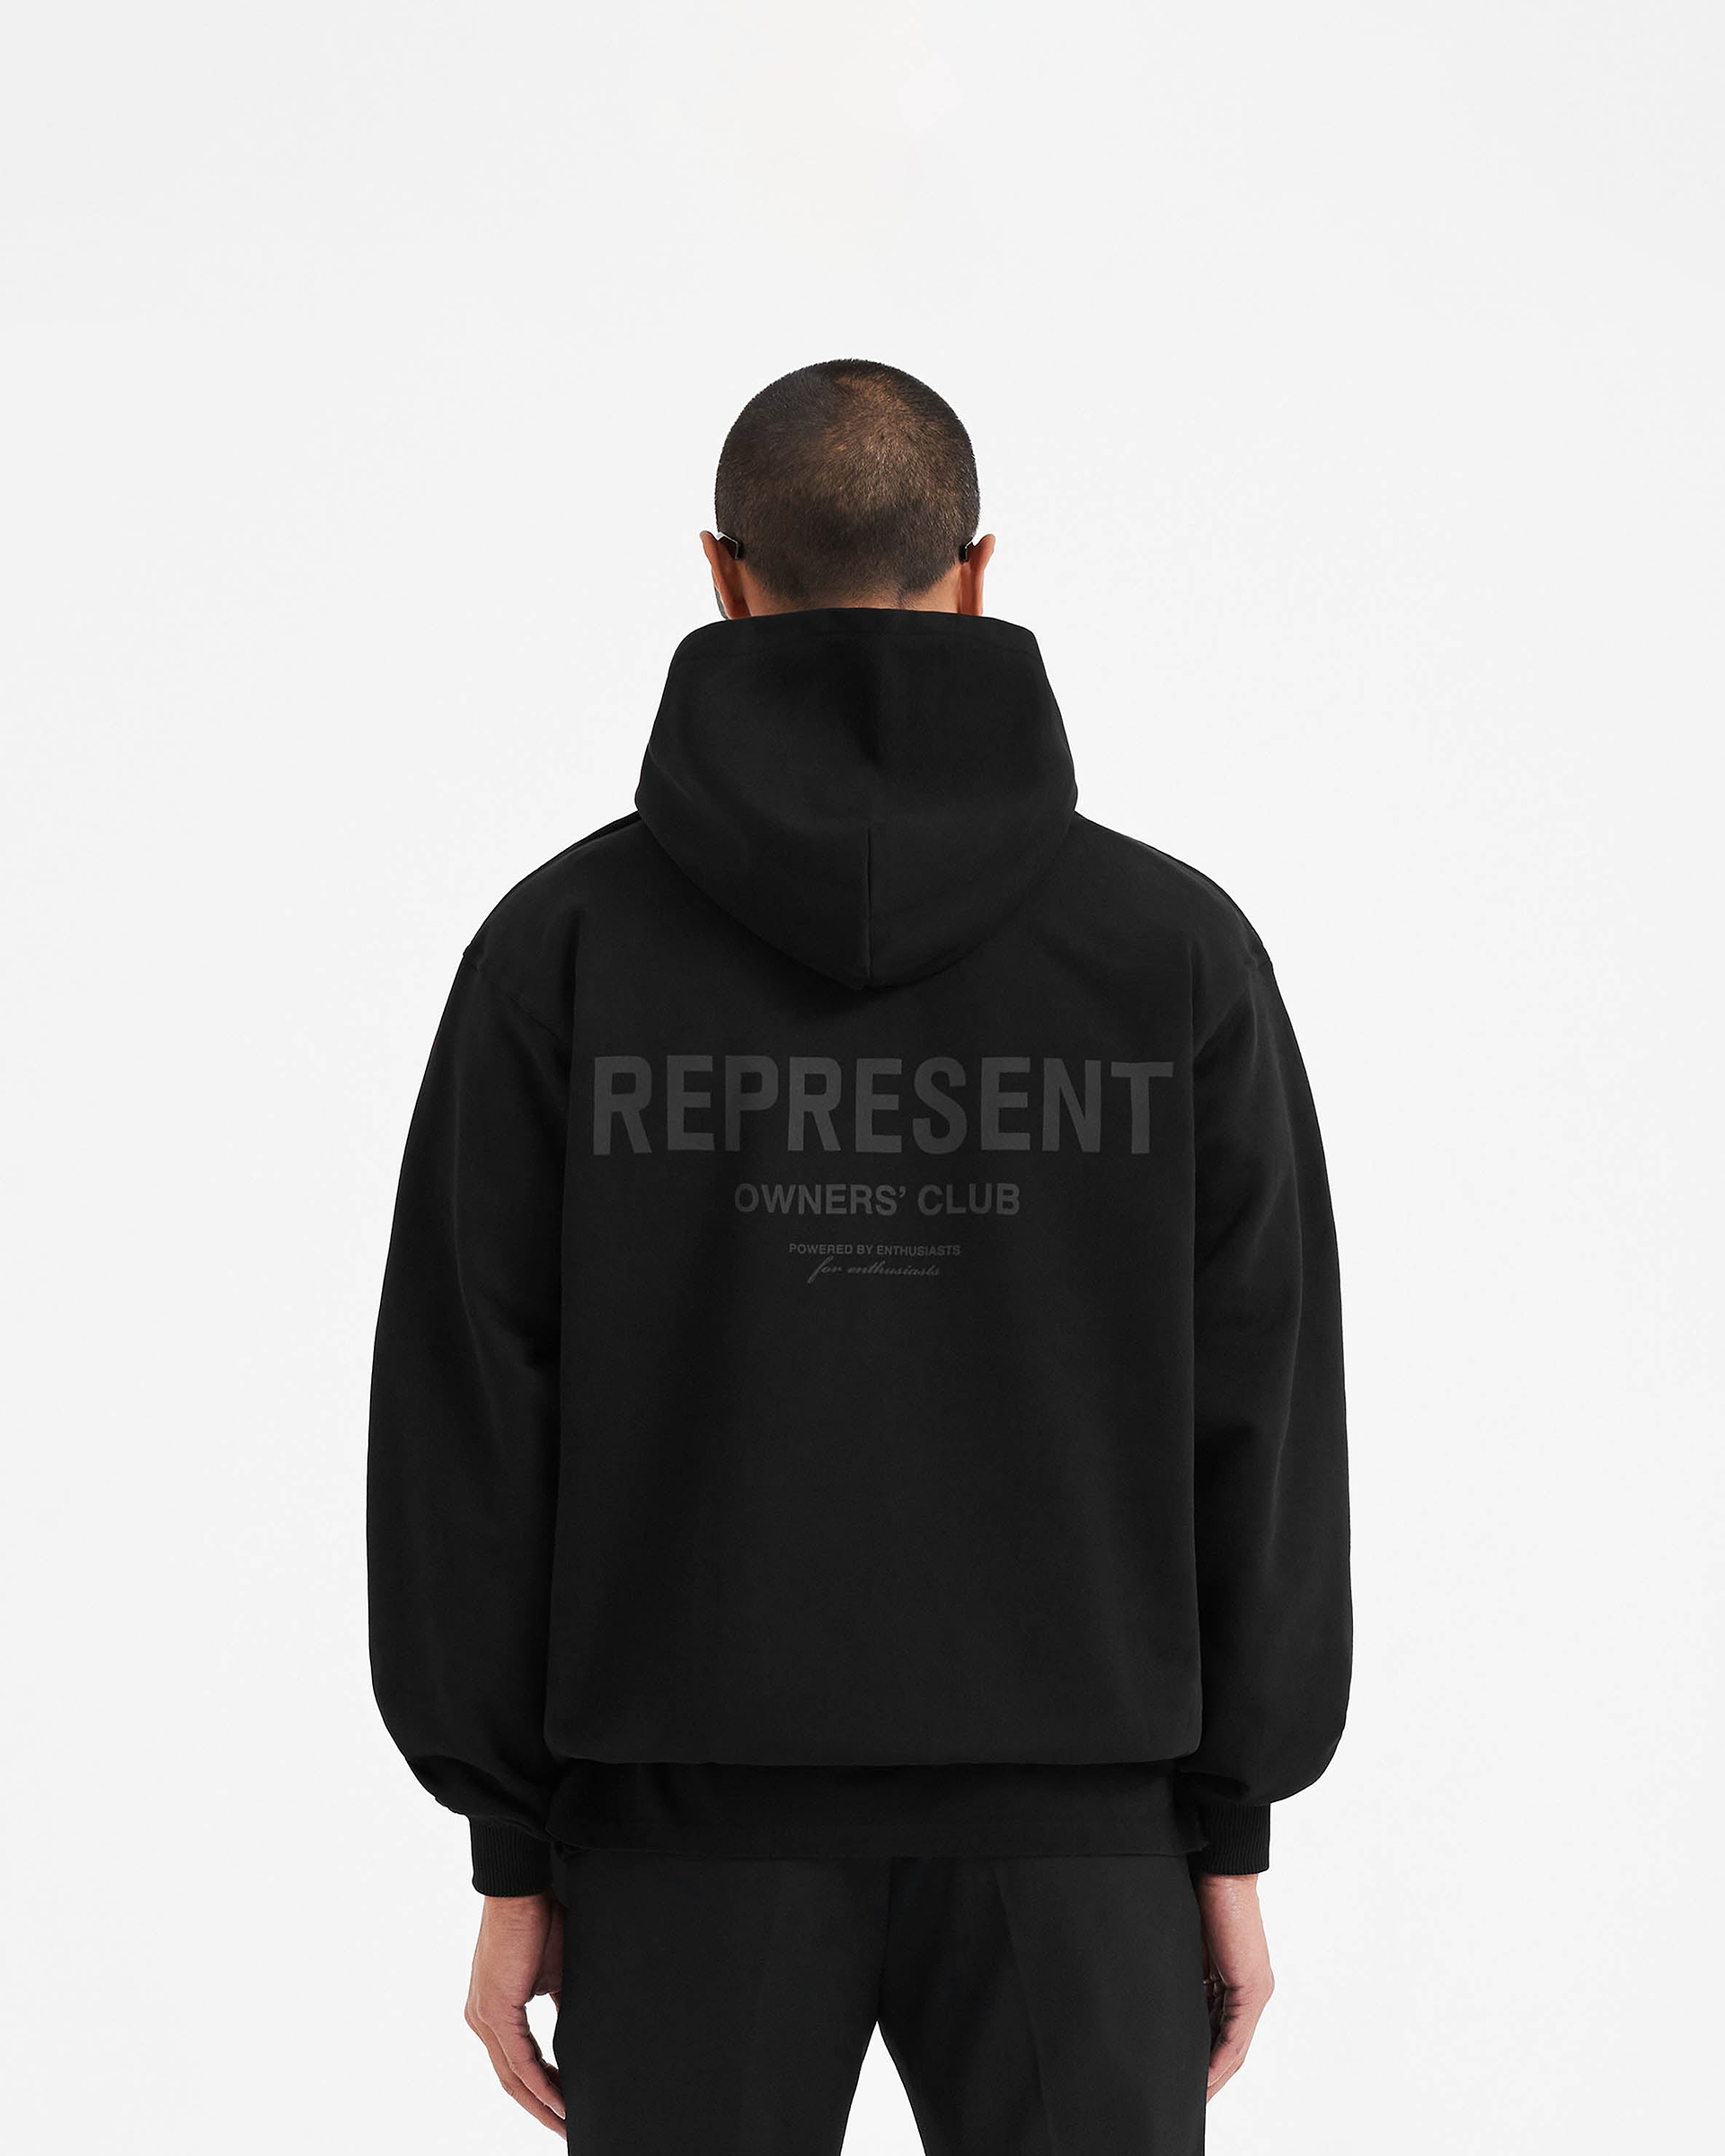 Black Reflective Hoodie | Owners' Club | REPRESENT CLO